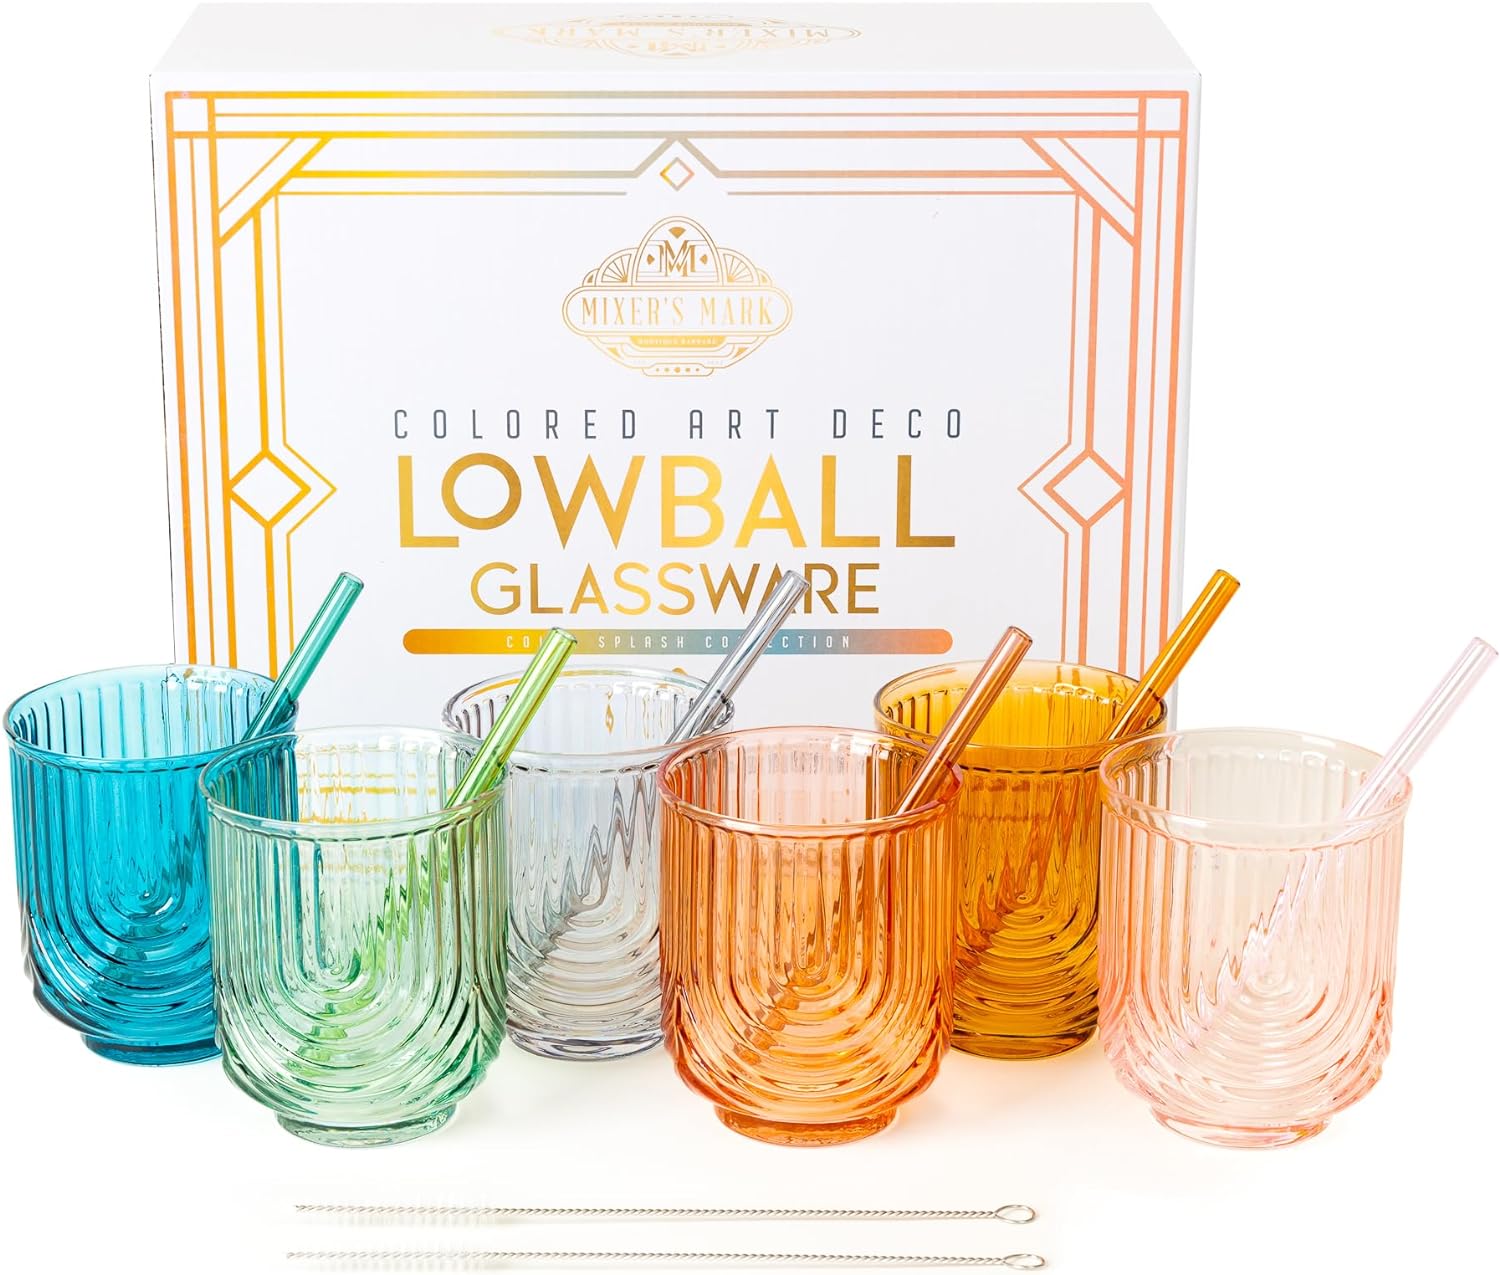 Handmade Colorful Lowball Glasses – 12 Oz Art Deco Cocktail Glasses Set of 6 with Straws & Straw Cleaner – Gift-Ready Low Ball Glasses – Unique Colored Vintage Glassware for Home Bar & Kitchen